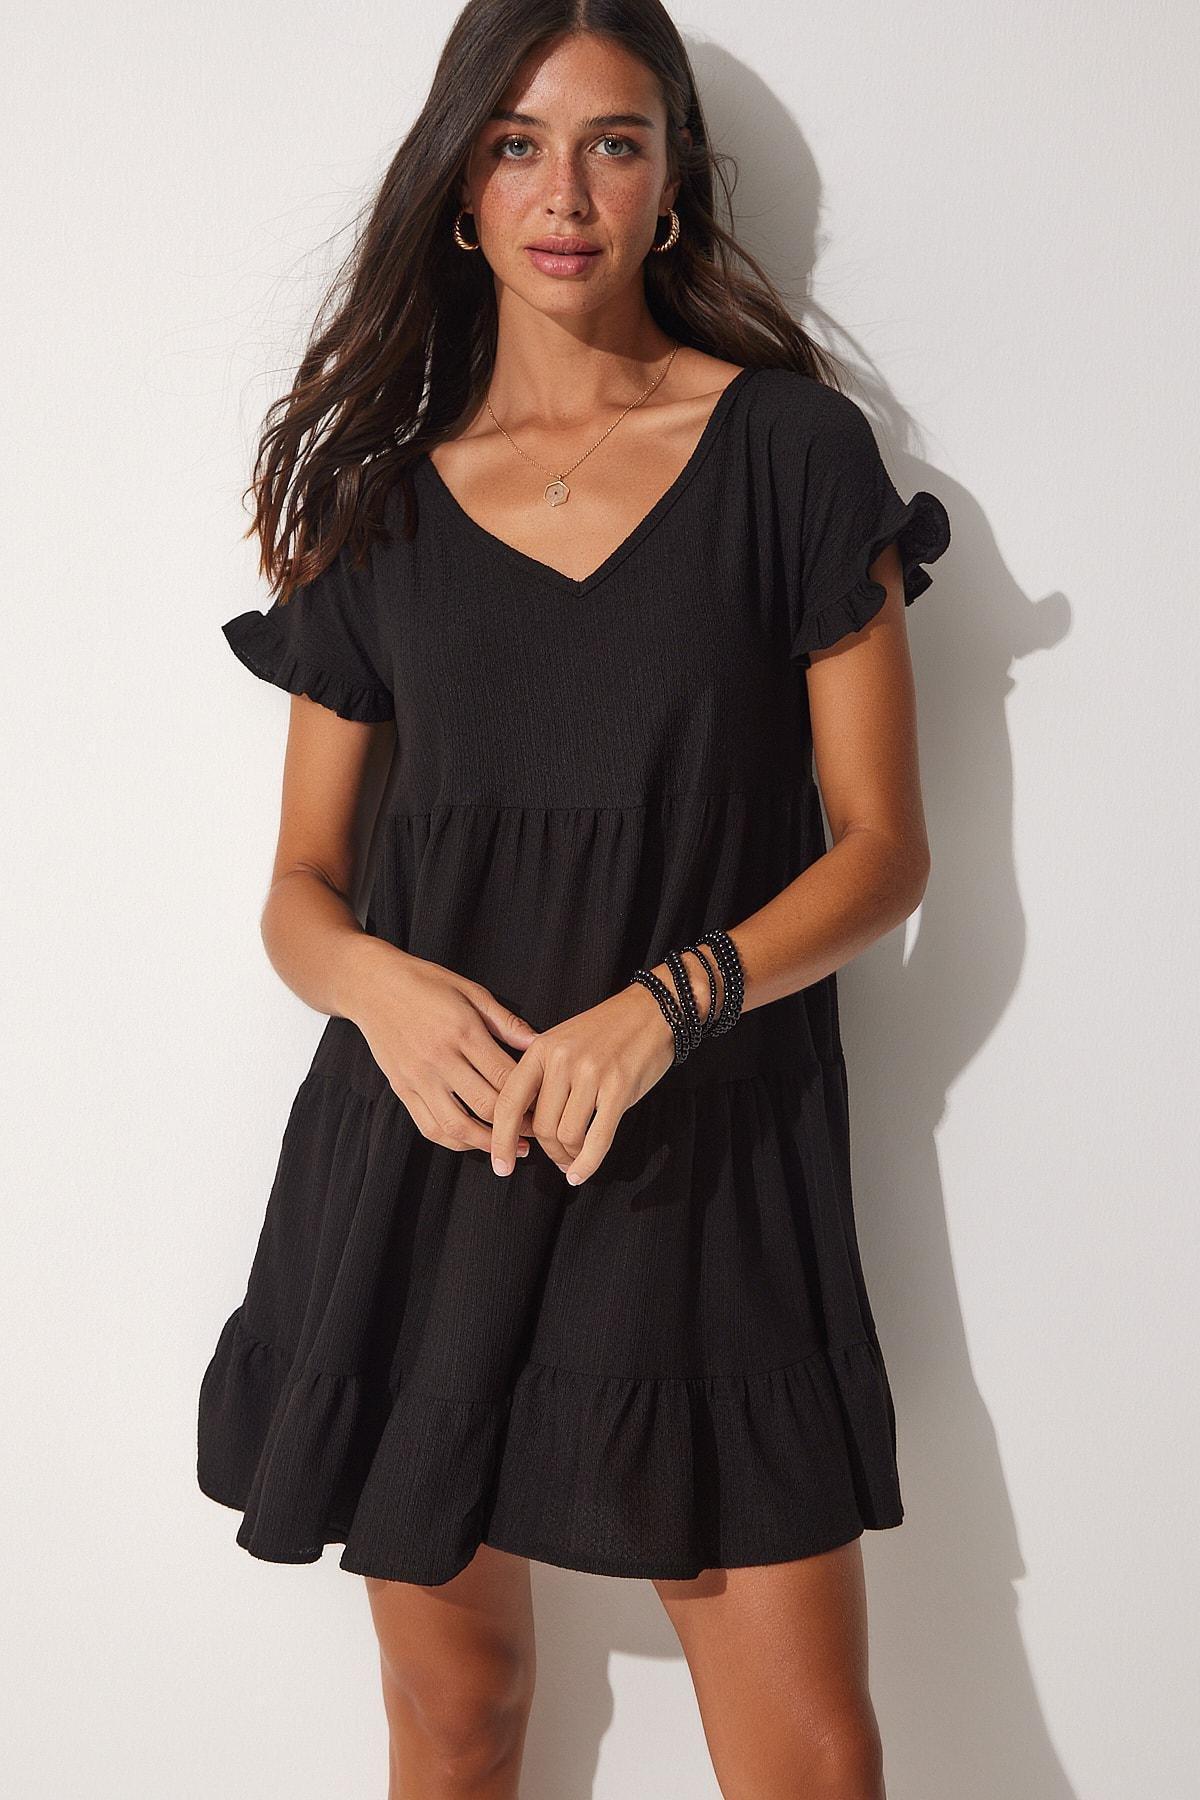 Happiness Istanbul - Black A-Line Dress